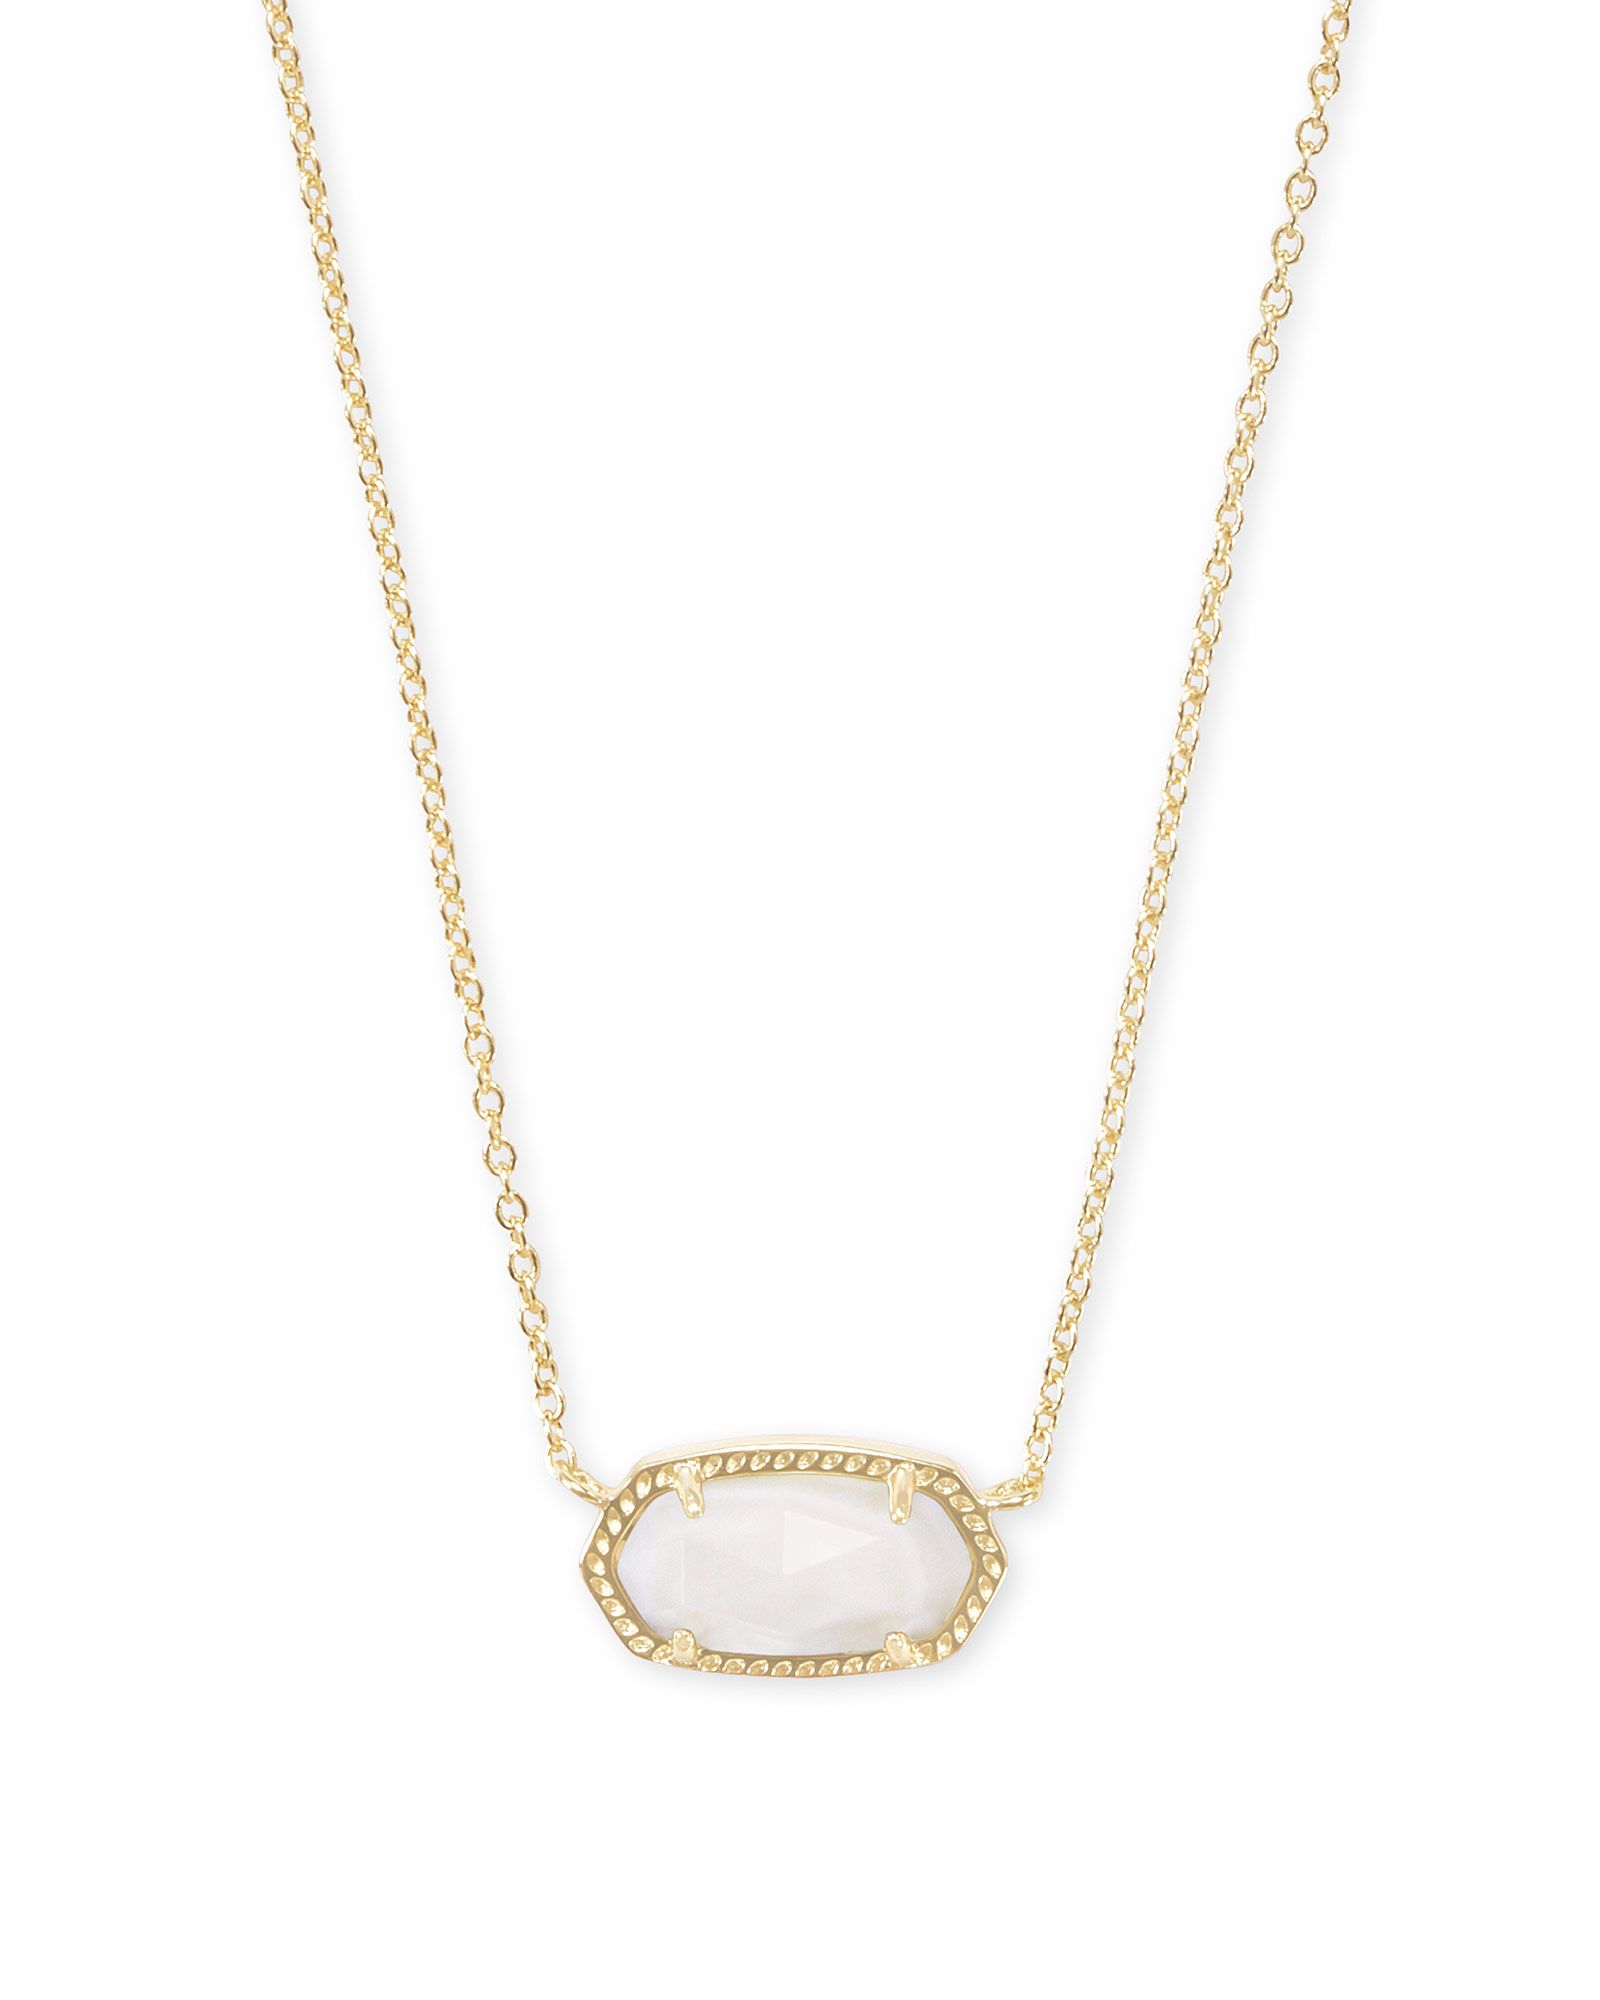 Elisa Gold Pendant Necklace In White Mother Of Pearl | Kendra Scott Pertaining To Most Popular Sparkling Teardrop Chandelier Pendant Necklaces (View 24 of 25)